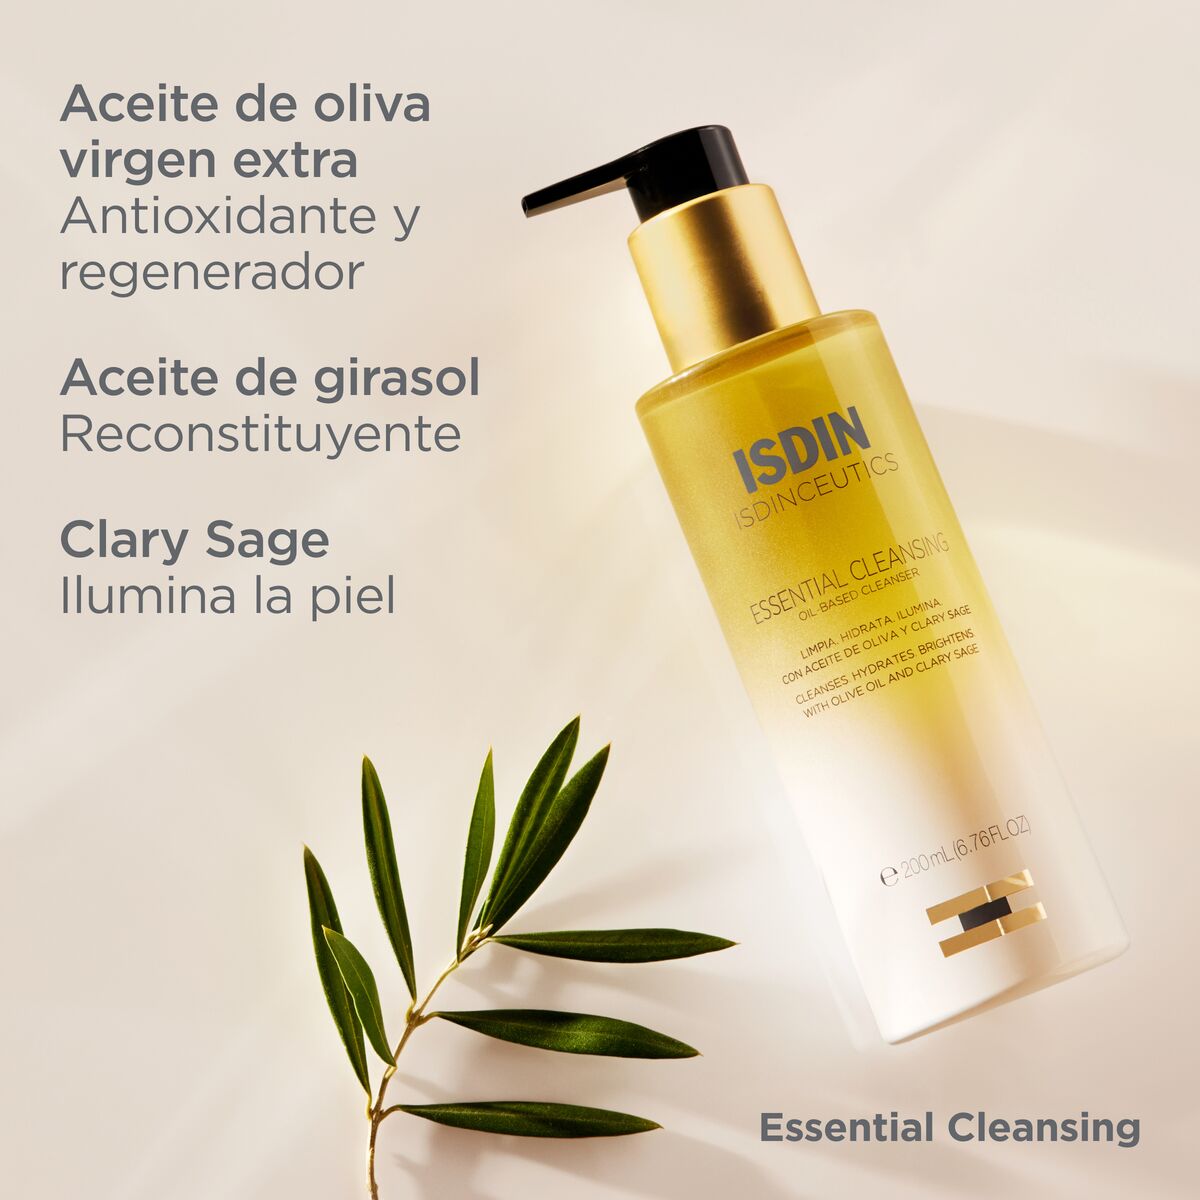 Isdin Aceite Limpiador Facial oil-to-milk Essential Cleansing 200 Ml